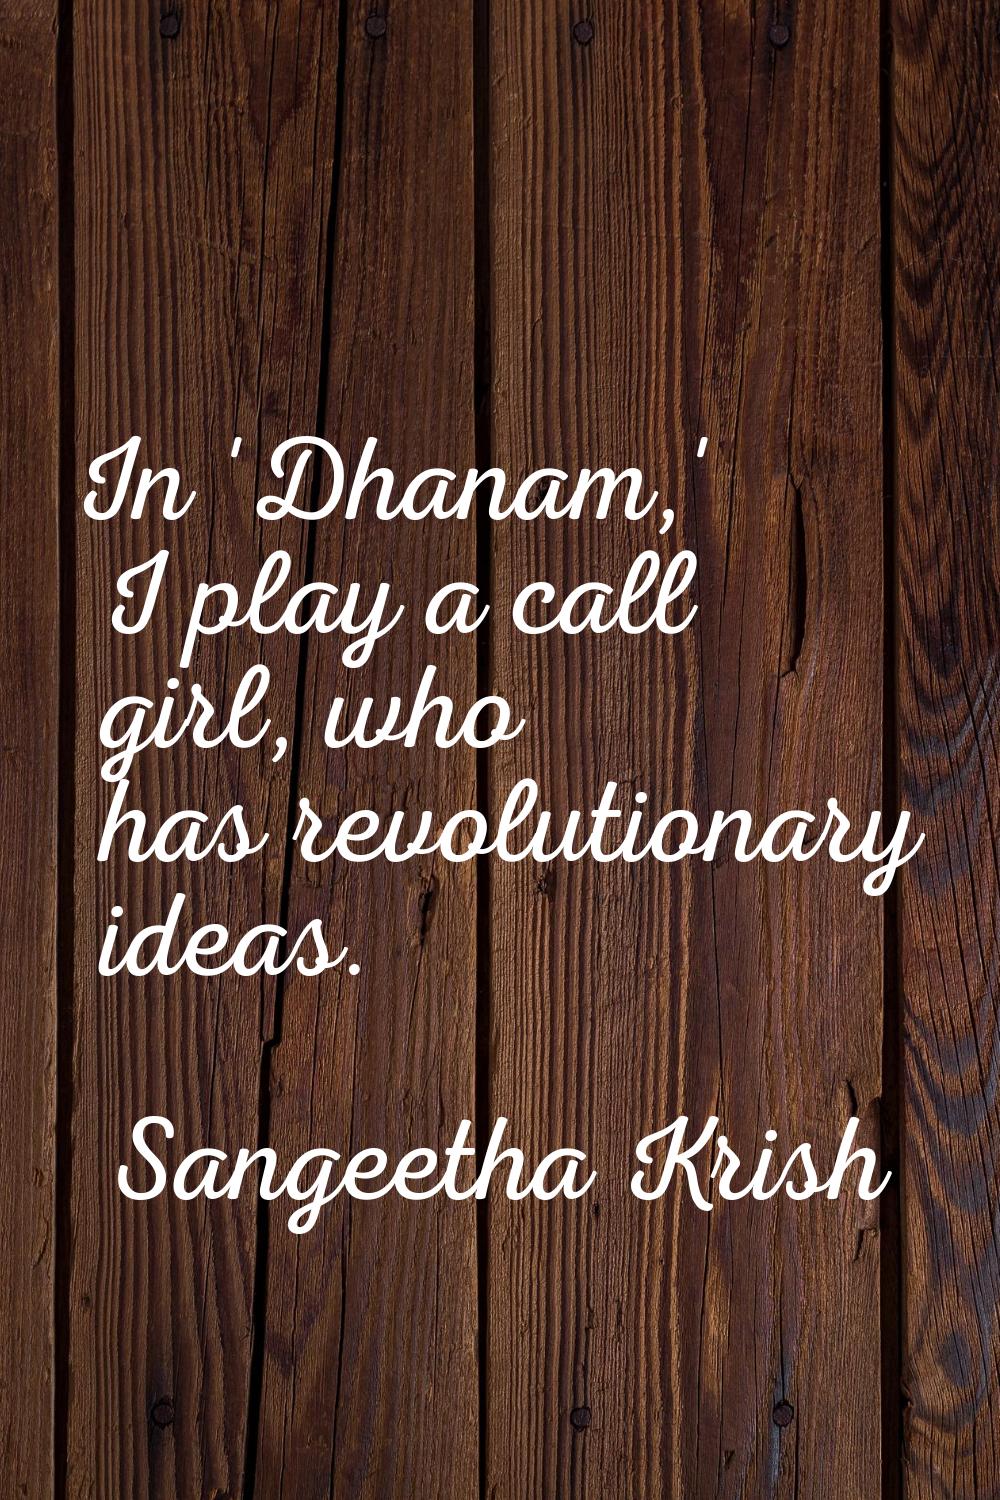 In 'Dhanam,' I play a call girl, who has revolutionary ideas.